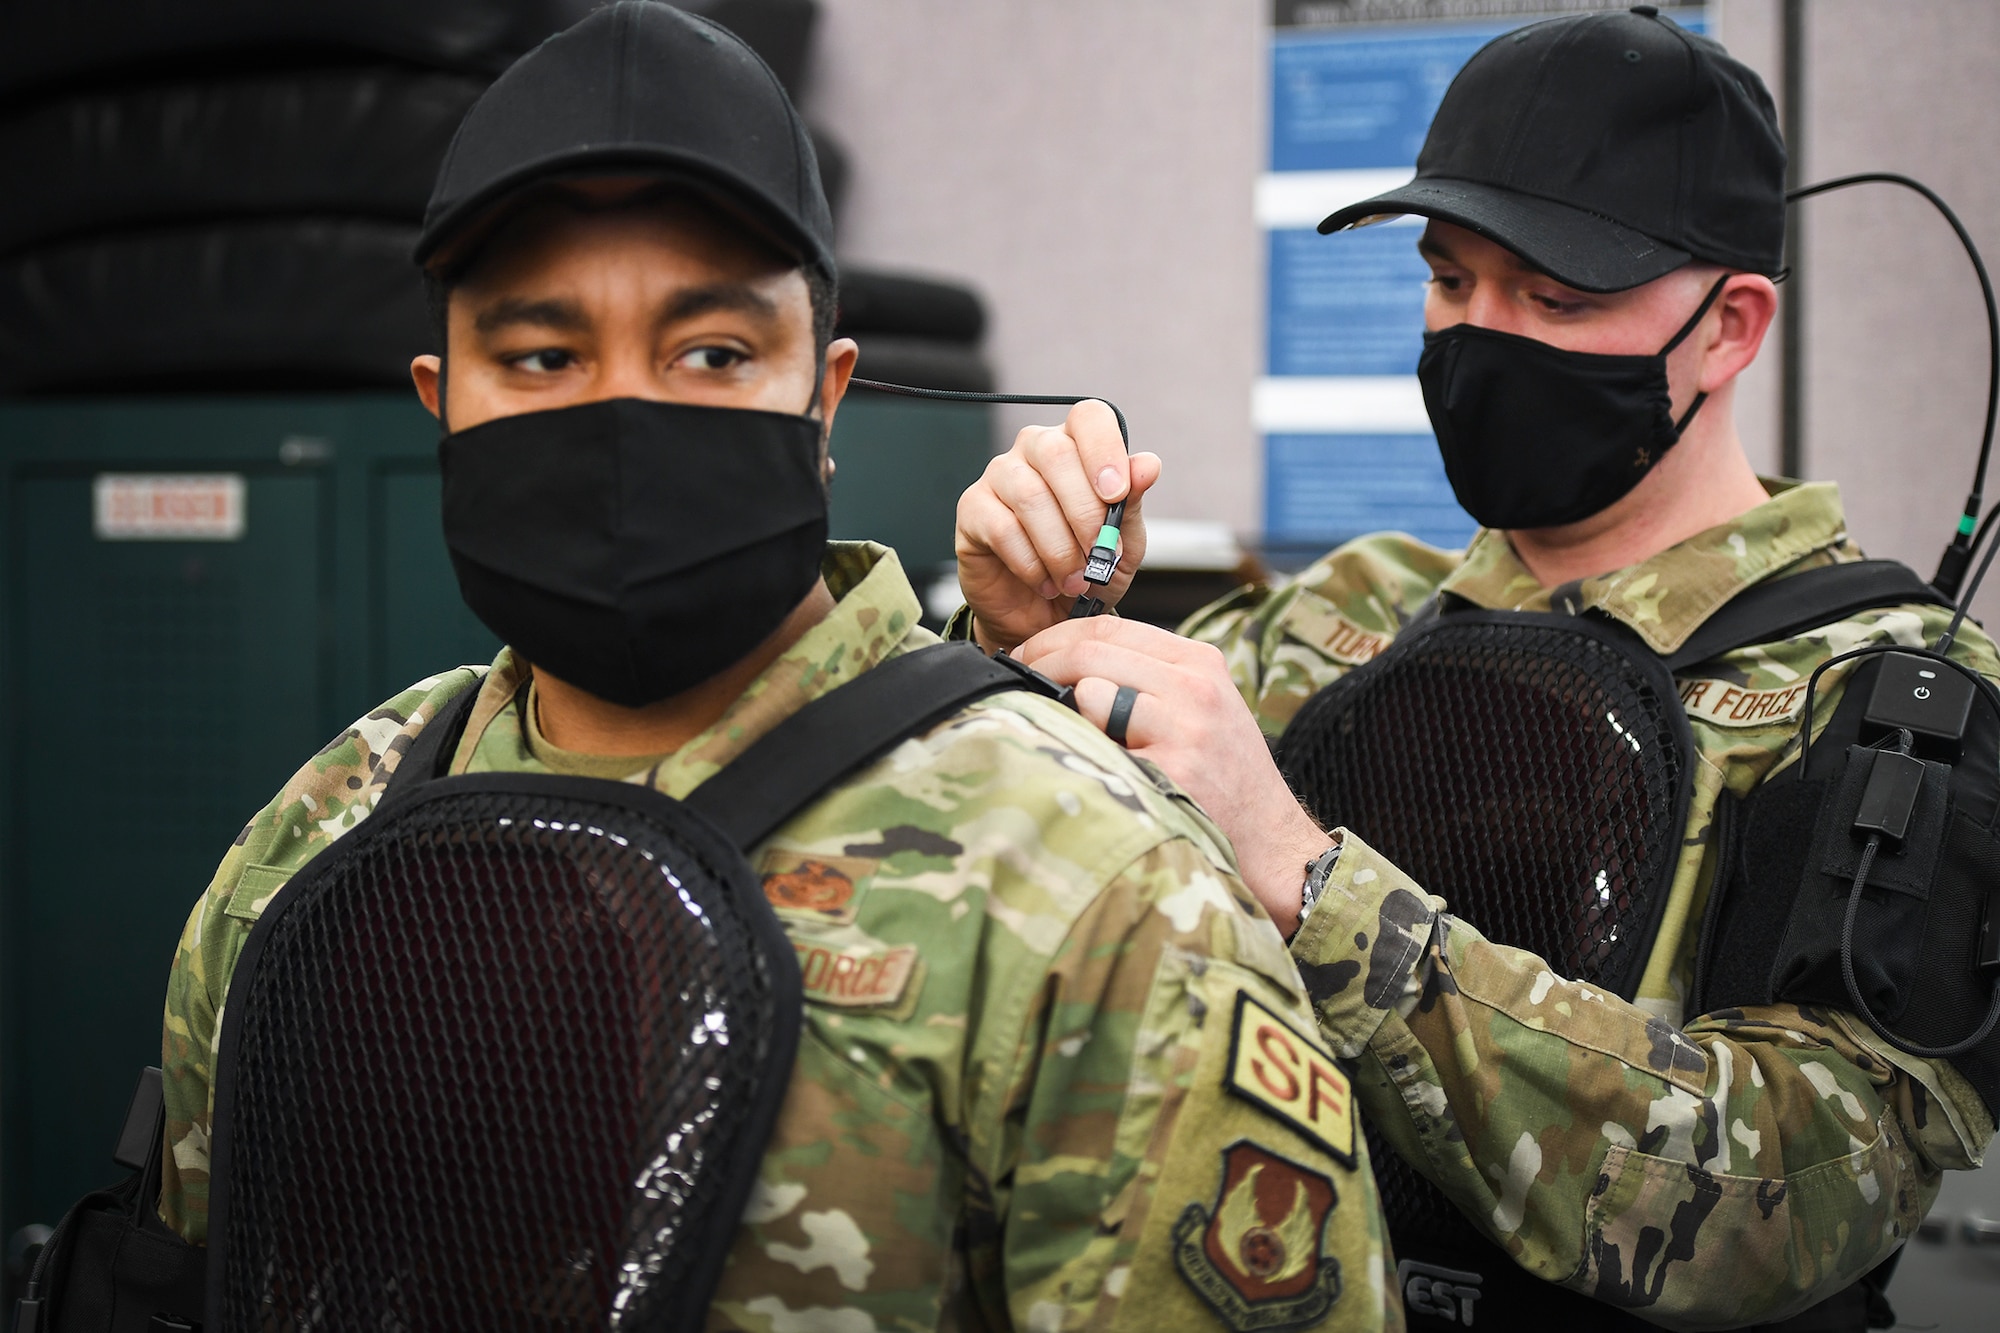 Defenders Revamp Training With Stressvest Kits Tinker Air Force Base